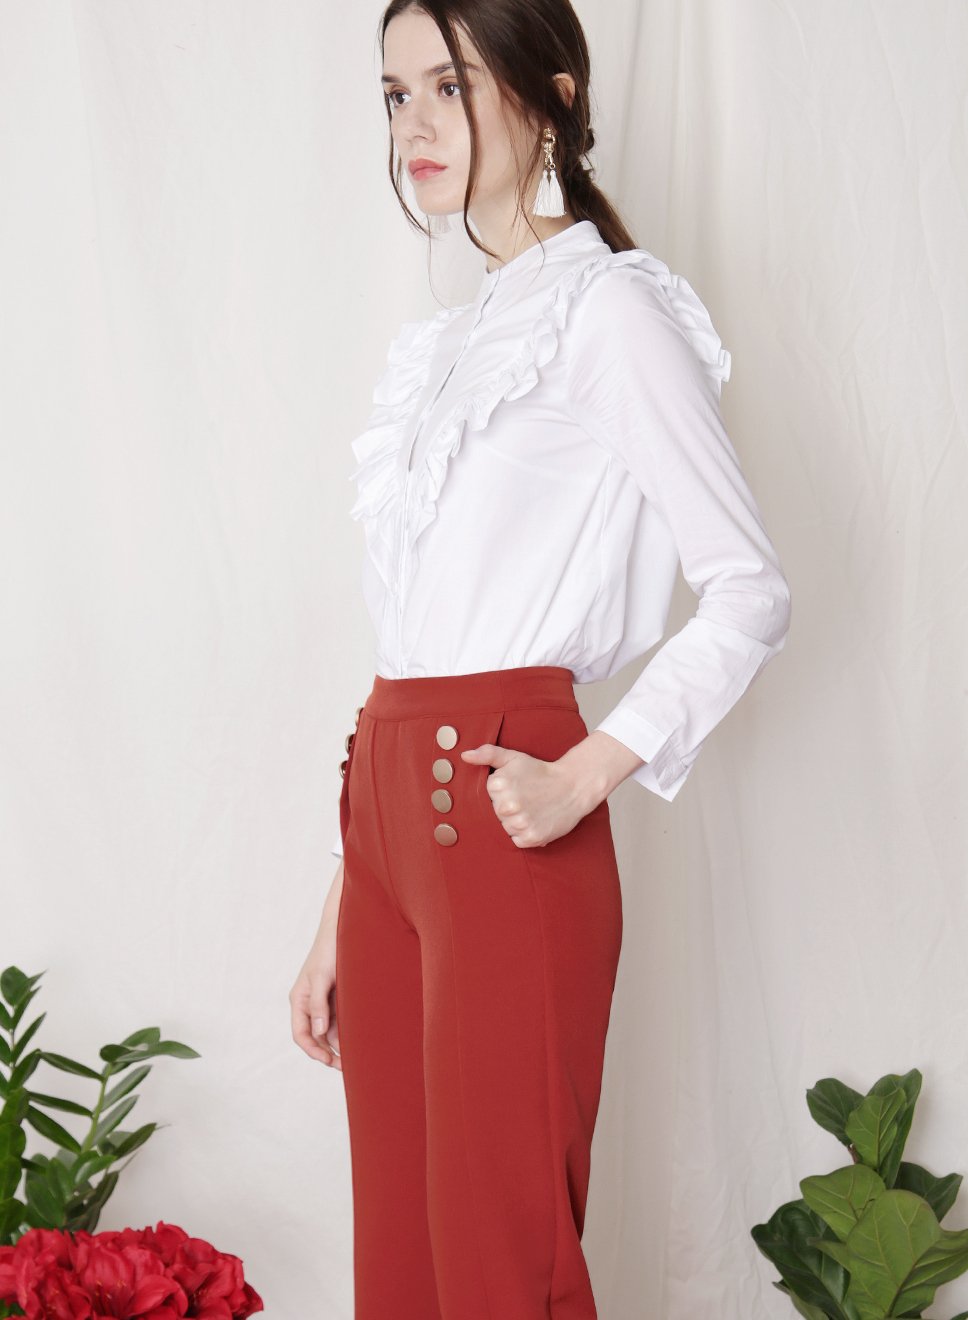 ALOFT Ruffled Button Down Shirt (White) - And Well Dressed